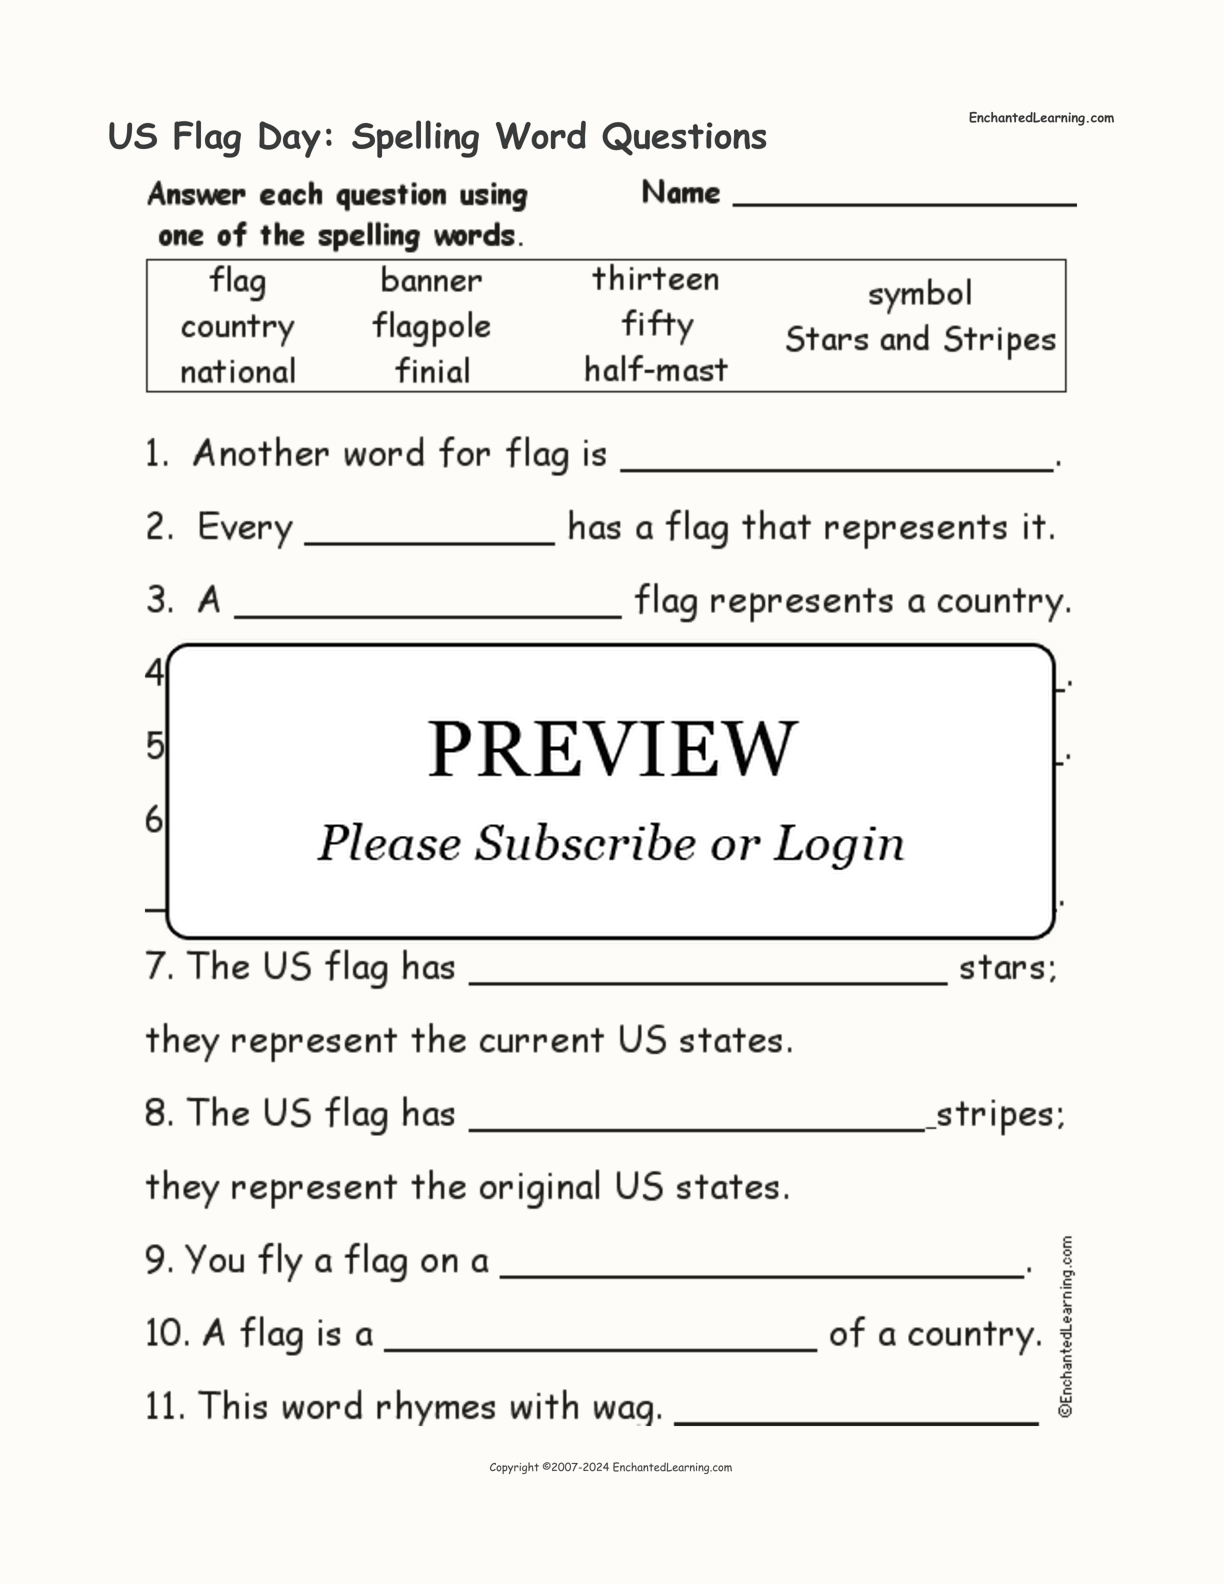 US Flag Day: Spelling Word Questions interactive worksheet page 1